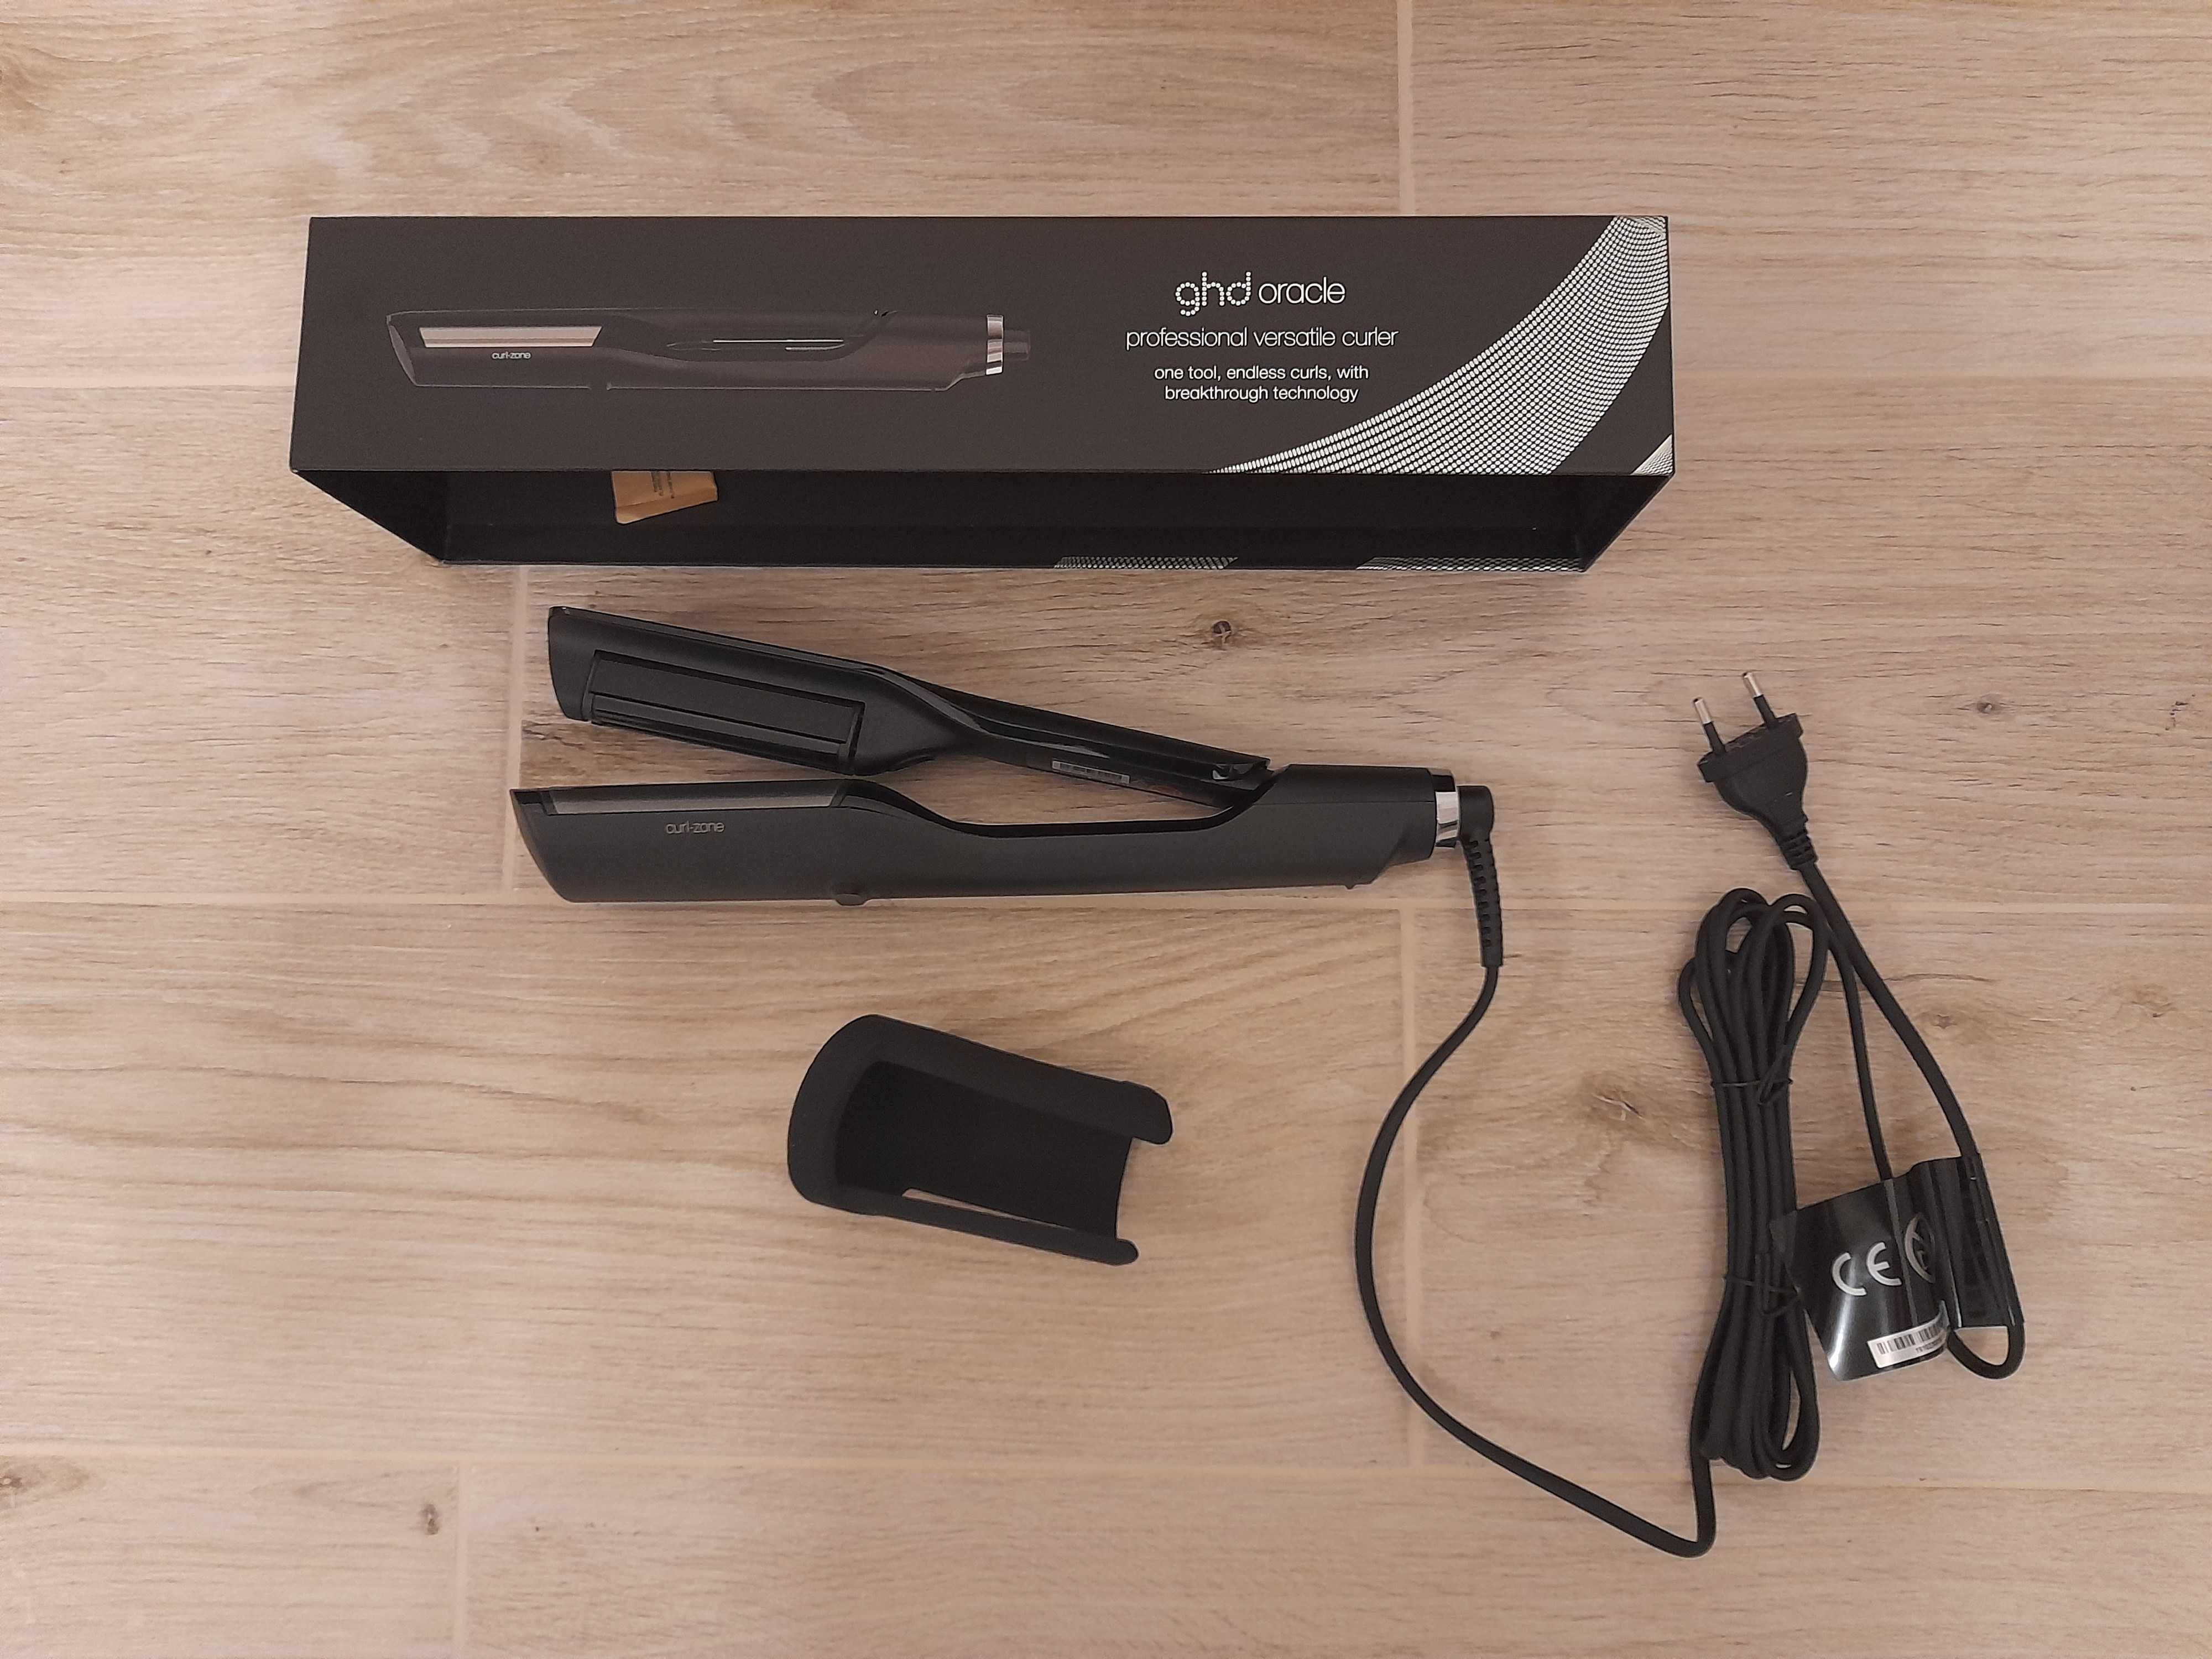 ghd oracle professional versatile curler - falownica do wlosow